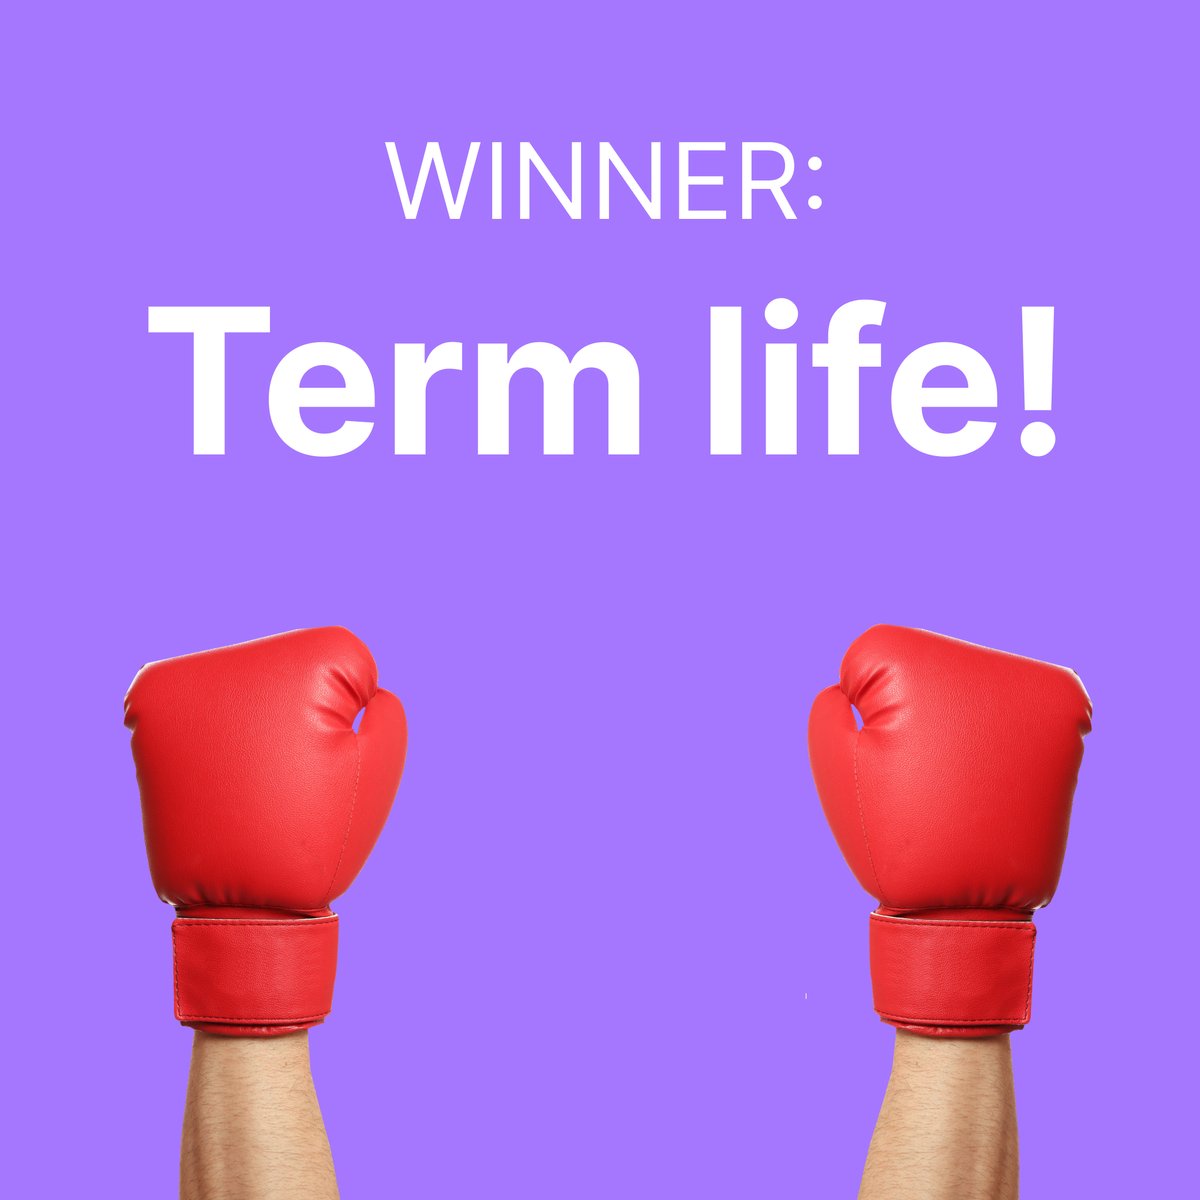 Term life insurance is generally a better idea than mortgage life insurance—find out why and if it's true for you. meetfabric.com/blog/term-life…